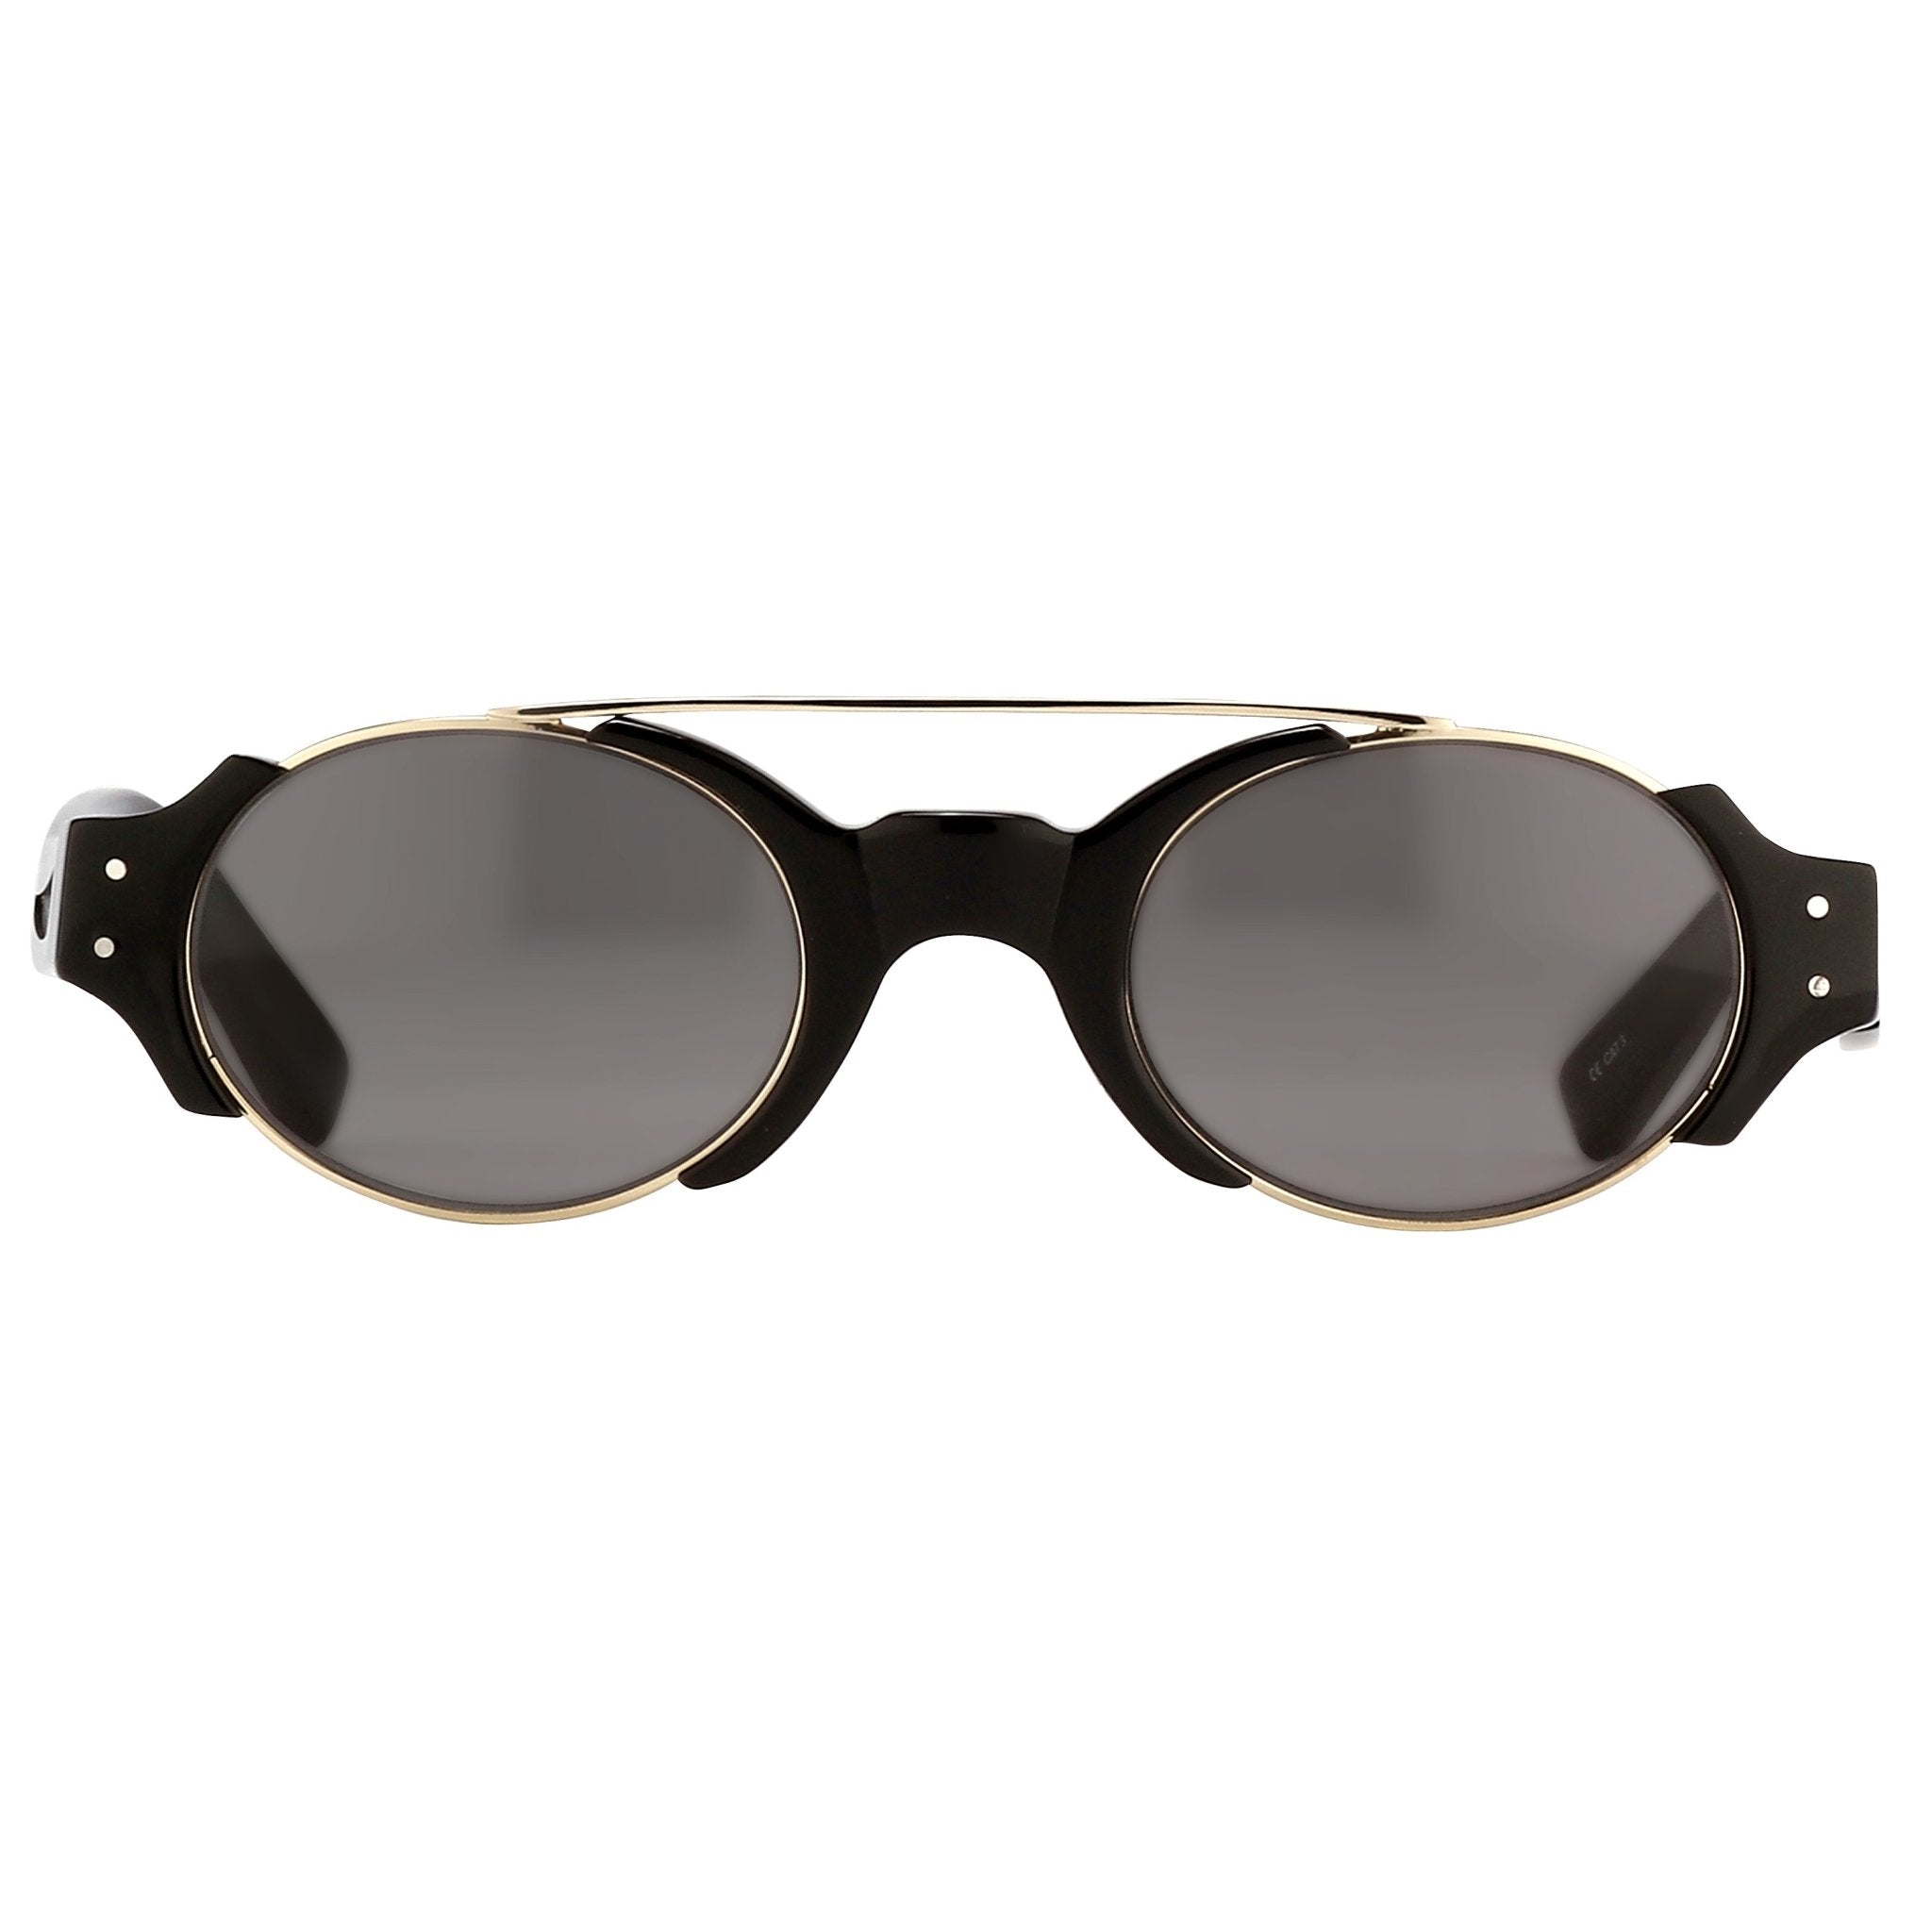 Erdem Women Sunglasses Black Light Gold with Grey Lenses Category 3 EDM8C2SUN - Watches & Crystals